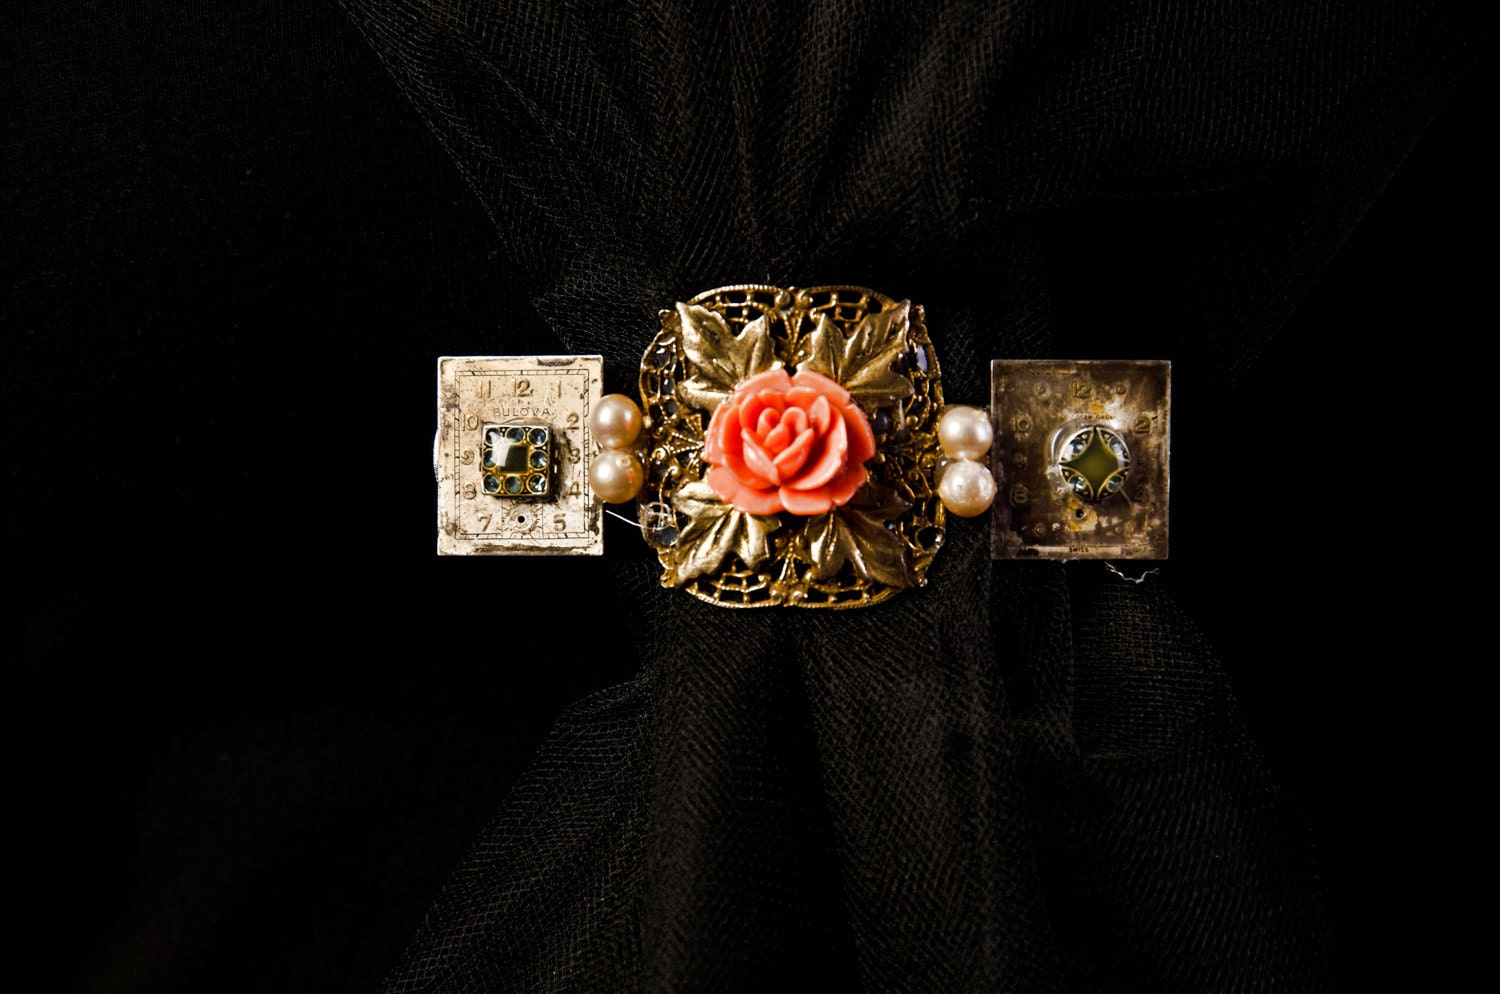 upcycled barrette with gold-toned flower centerpiece